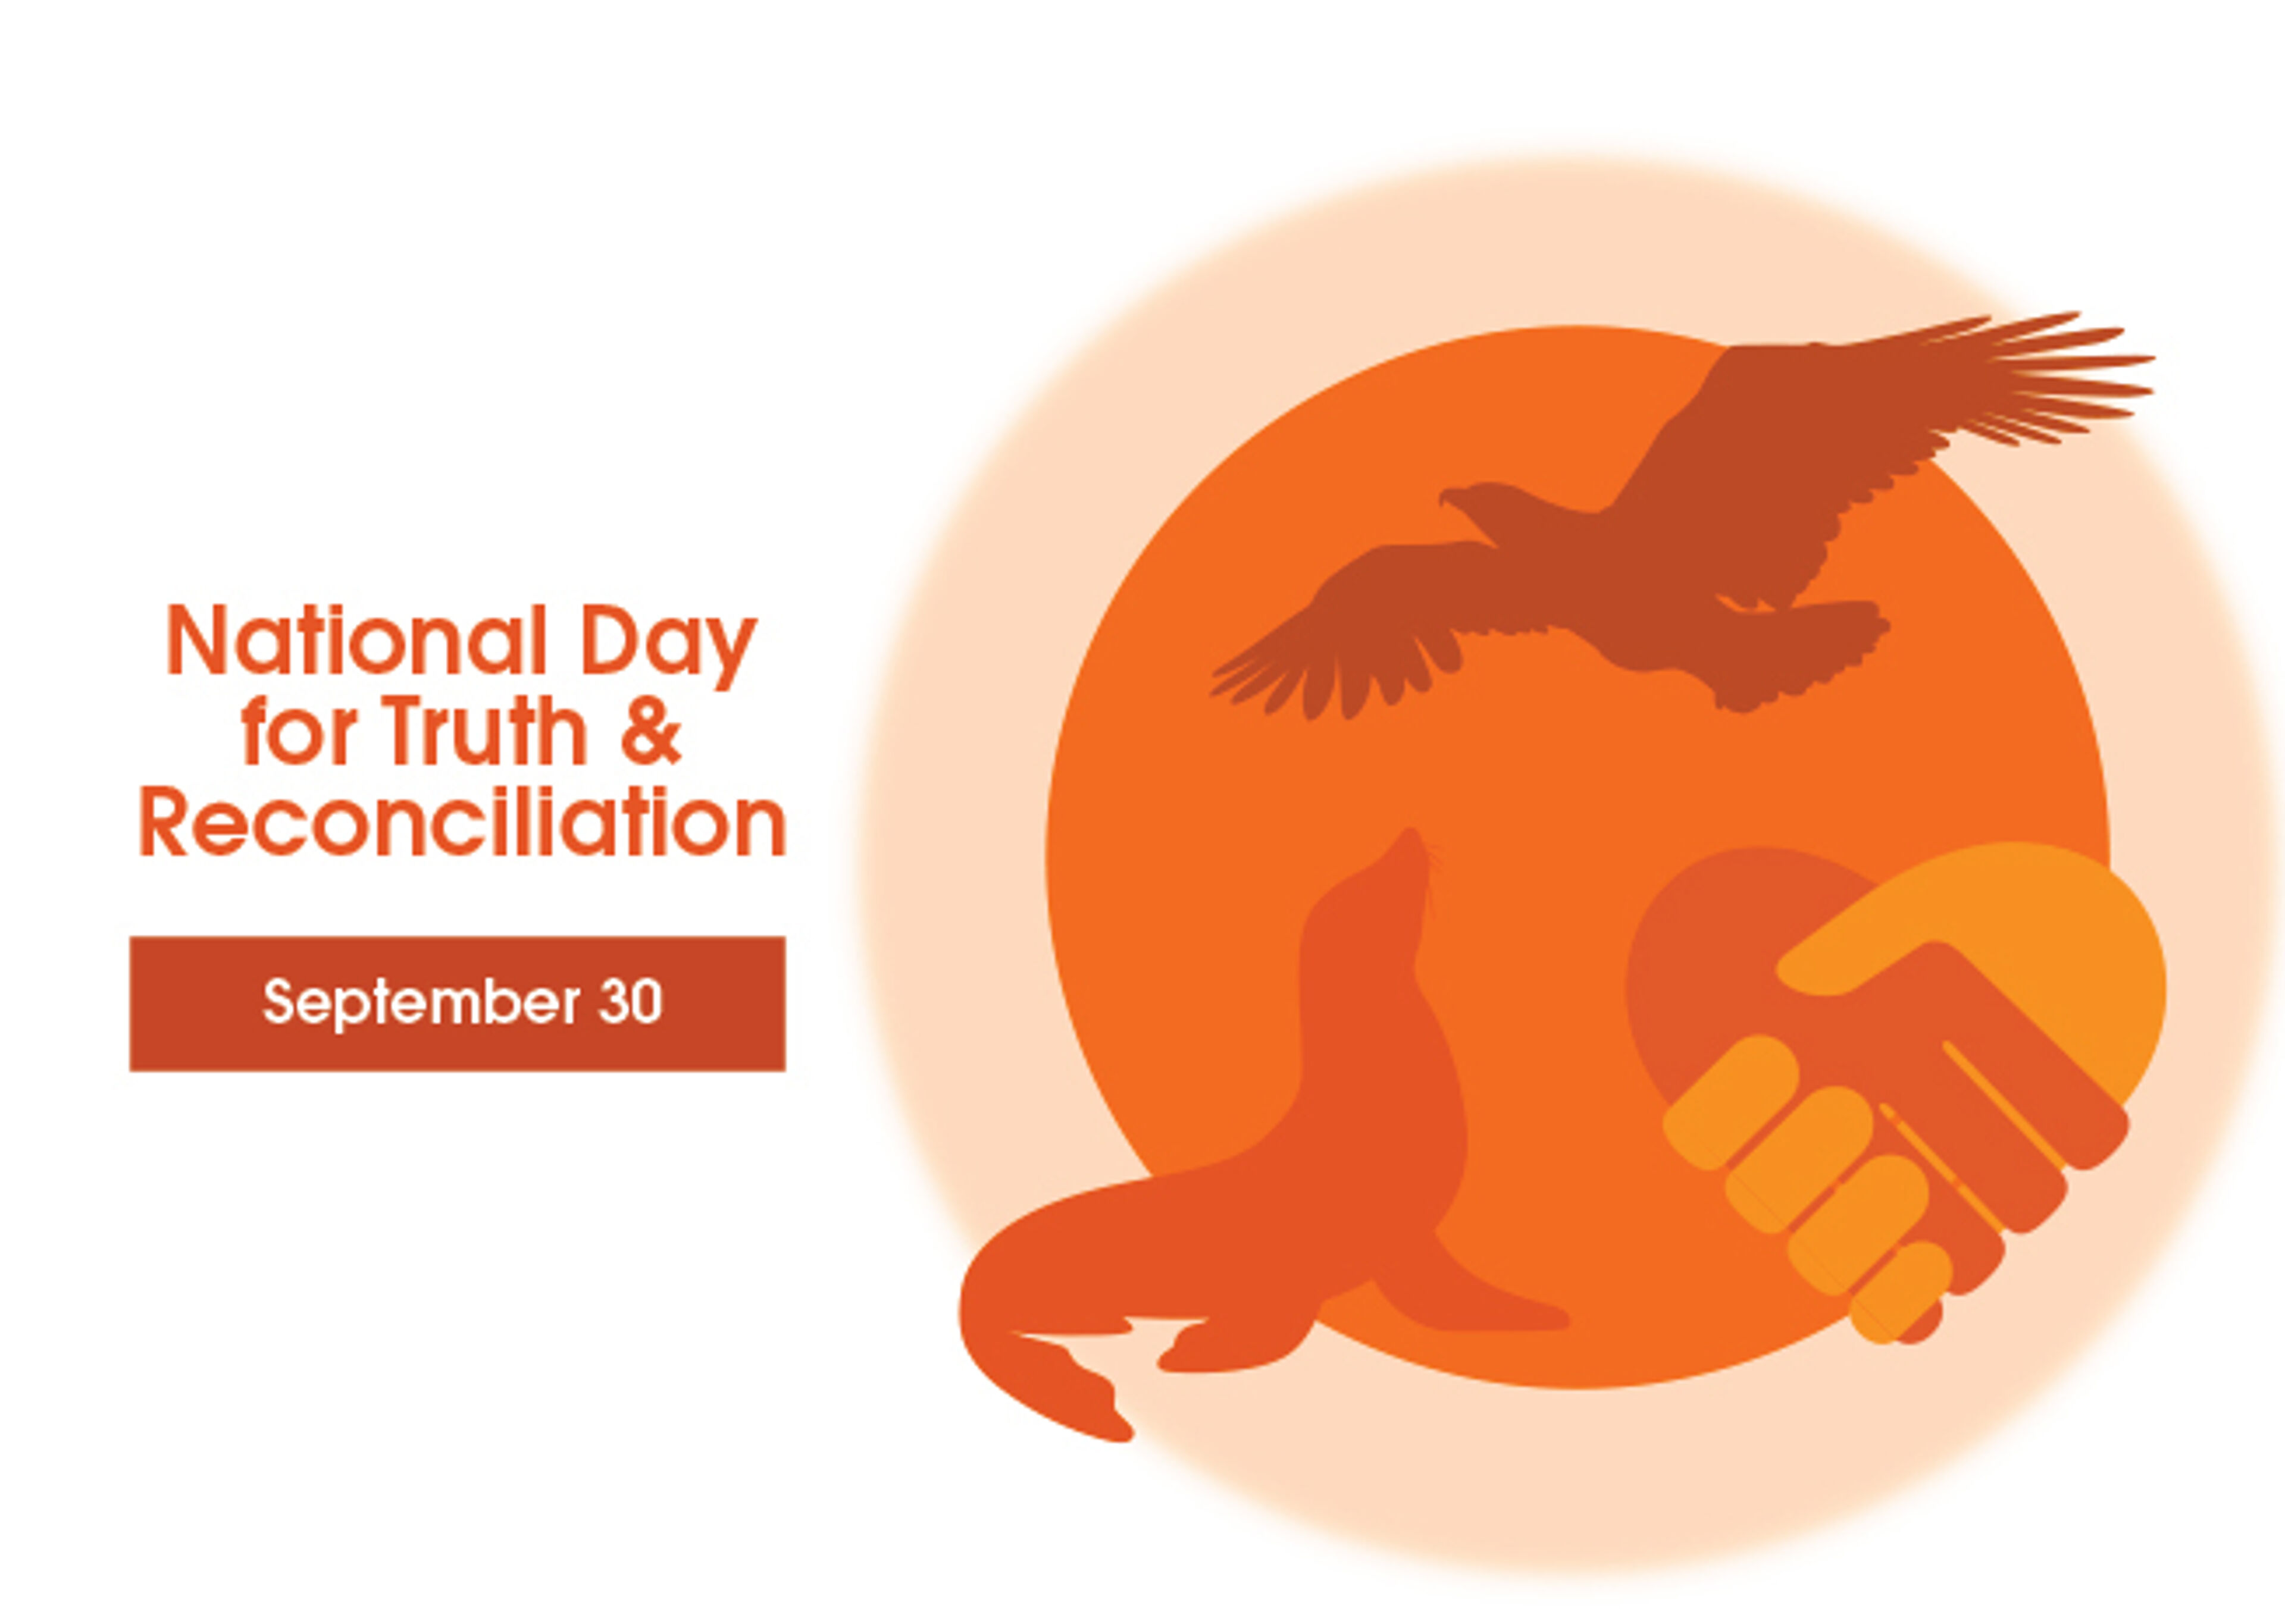 Commemorative image for the National Day for Truth & Reconciliation on September 30, featuring an eagle and a handshake.